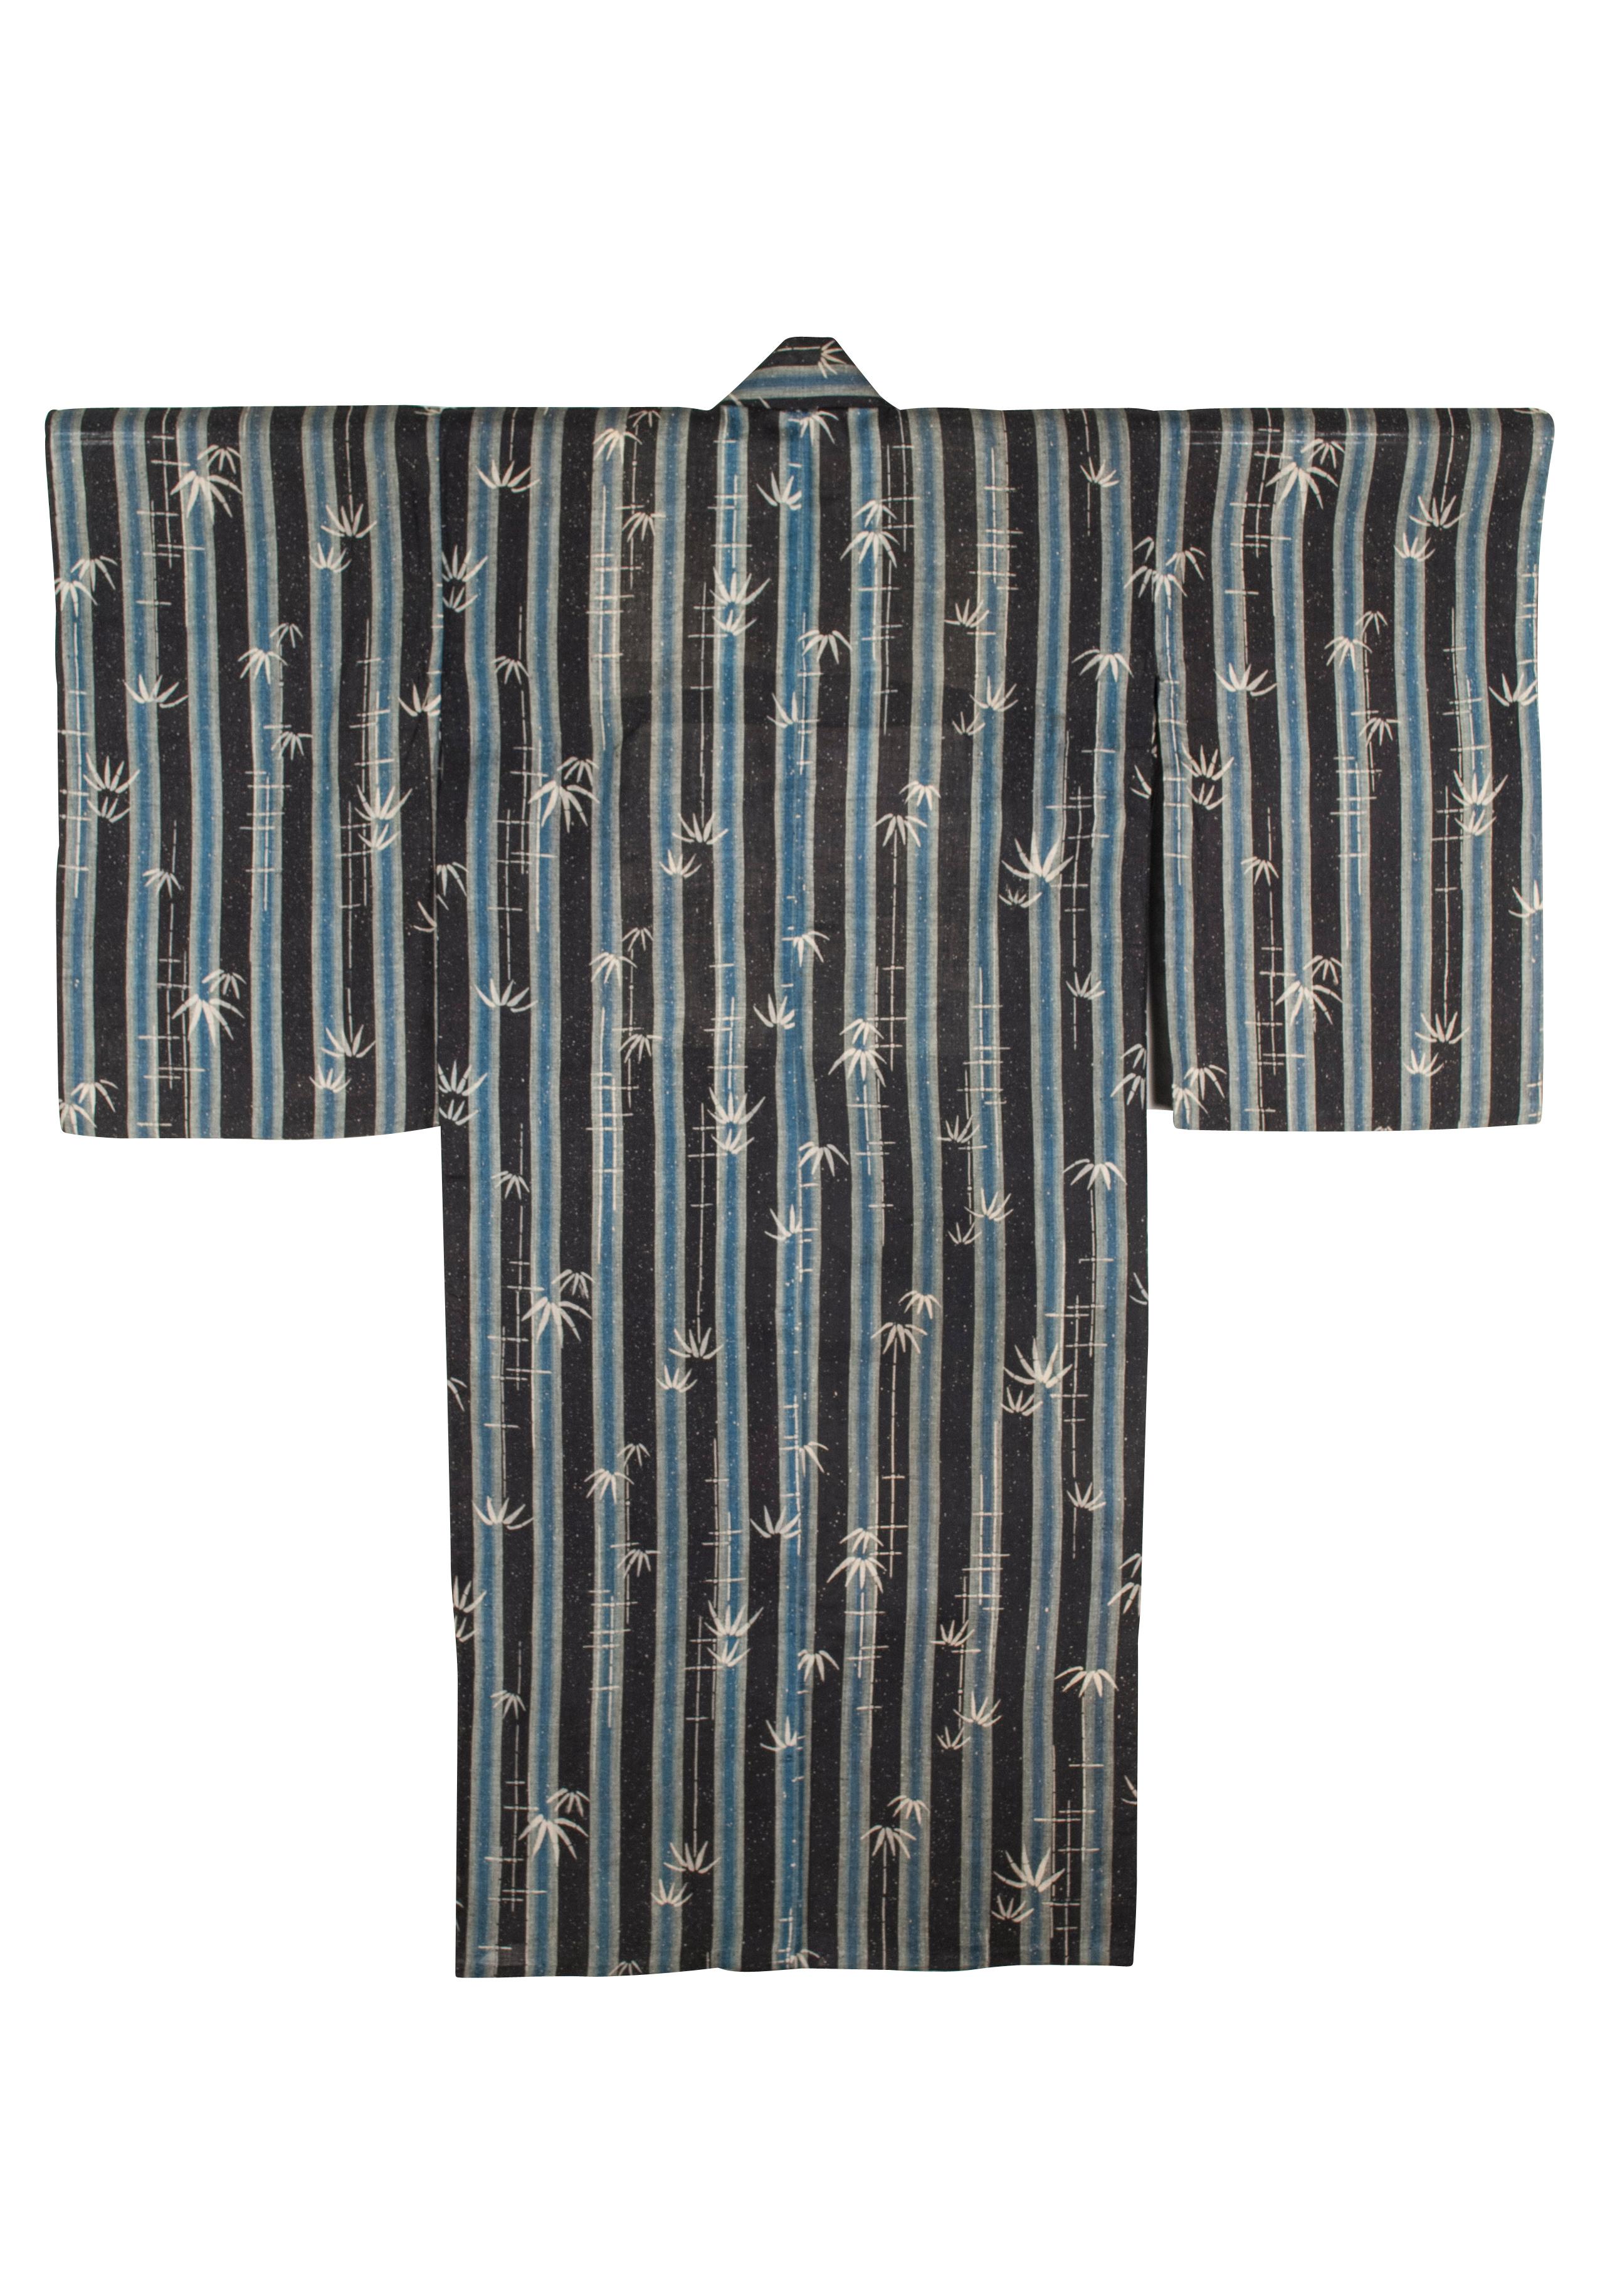 Taisho-Early Showa Period Japanese Stencil-Dyed Summer Kimono with Bamboo Motif